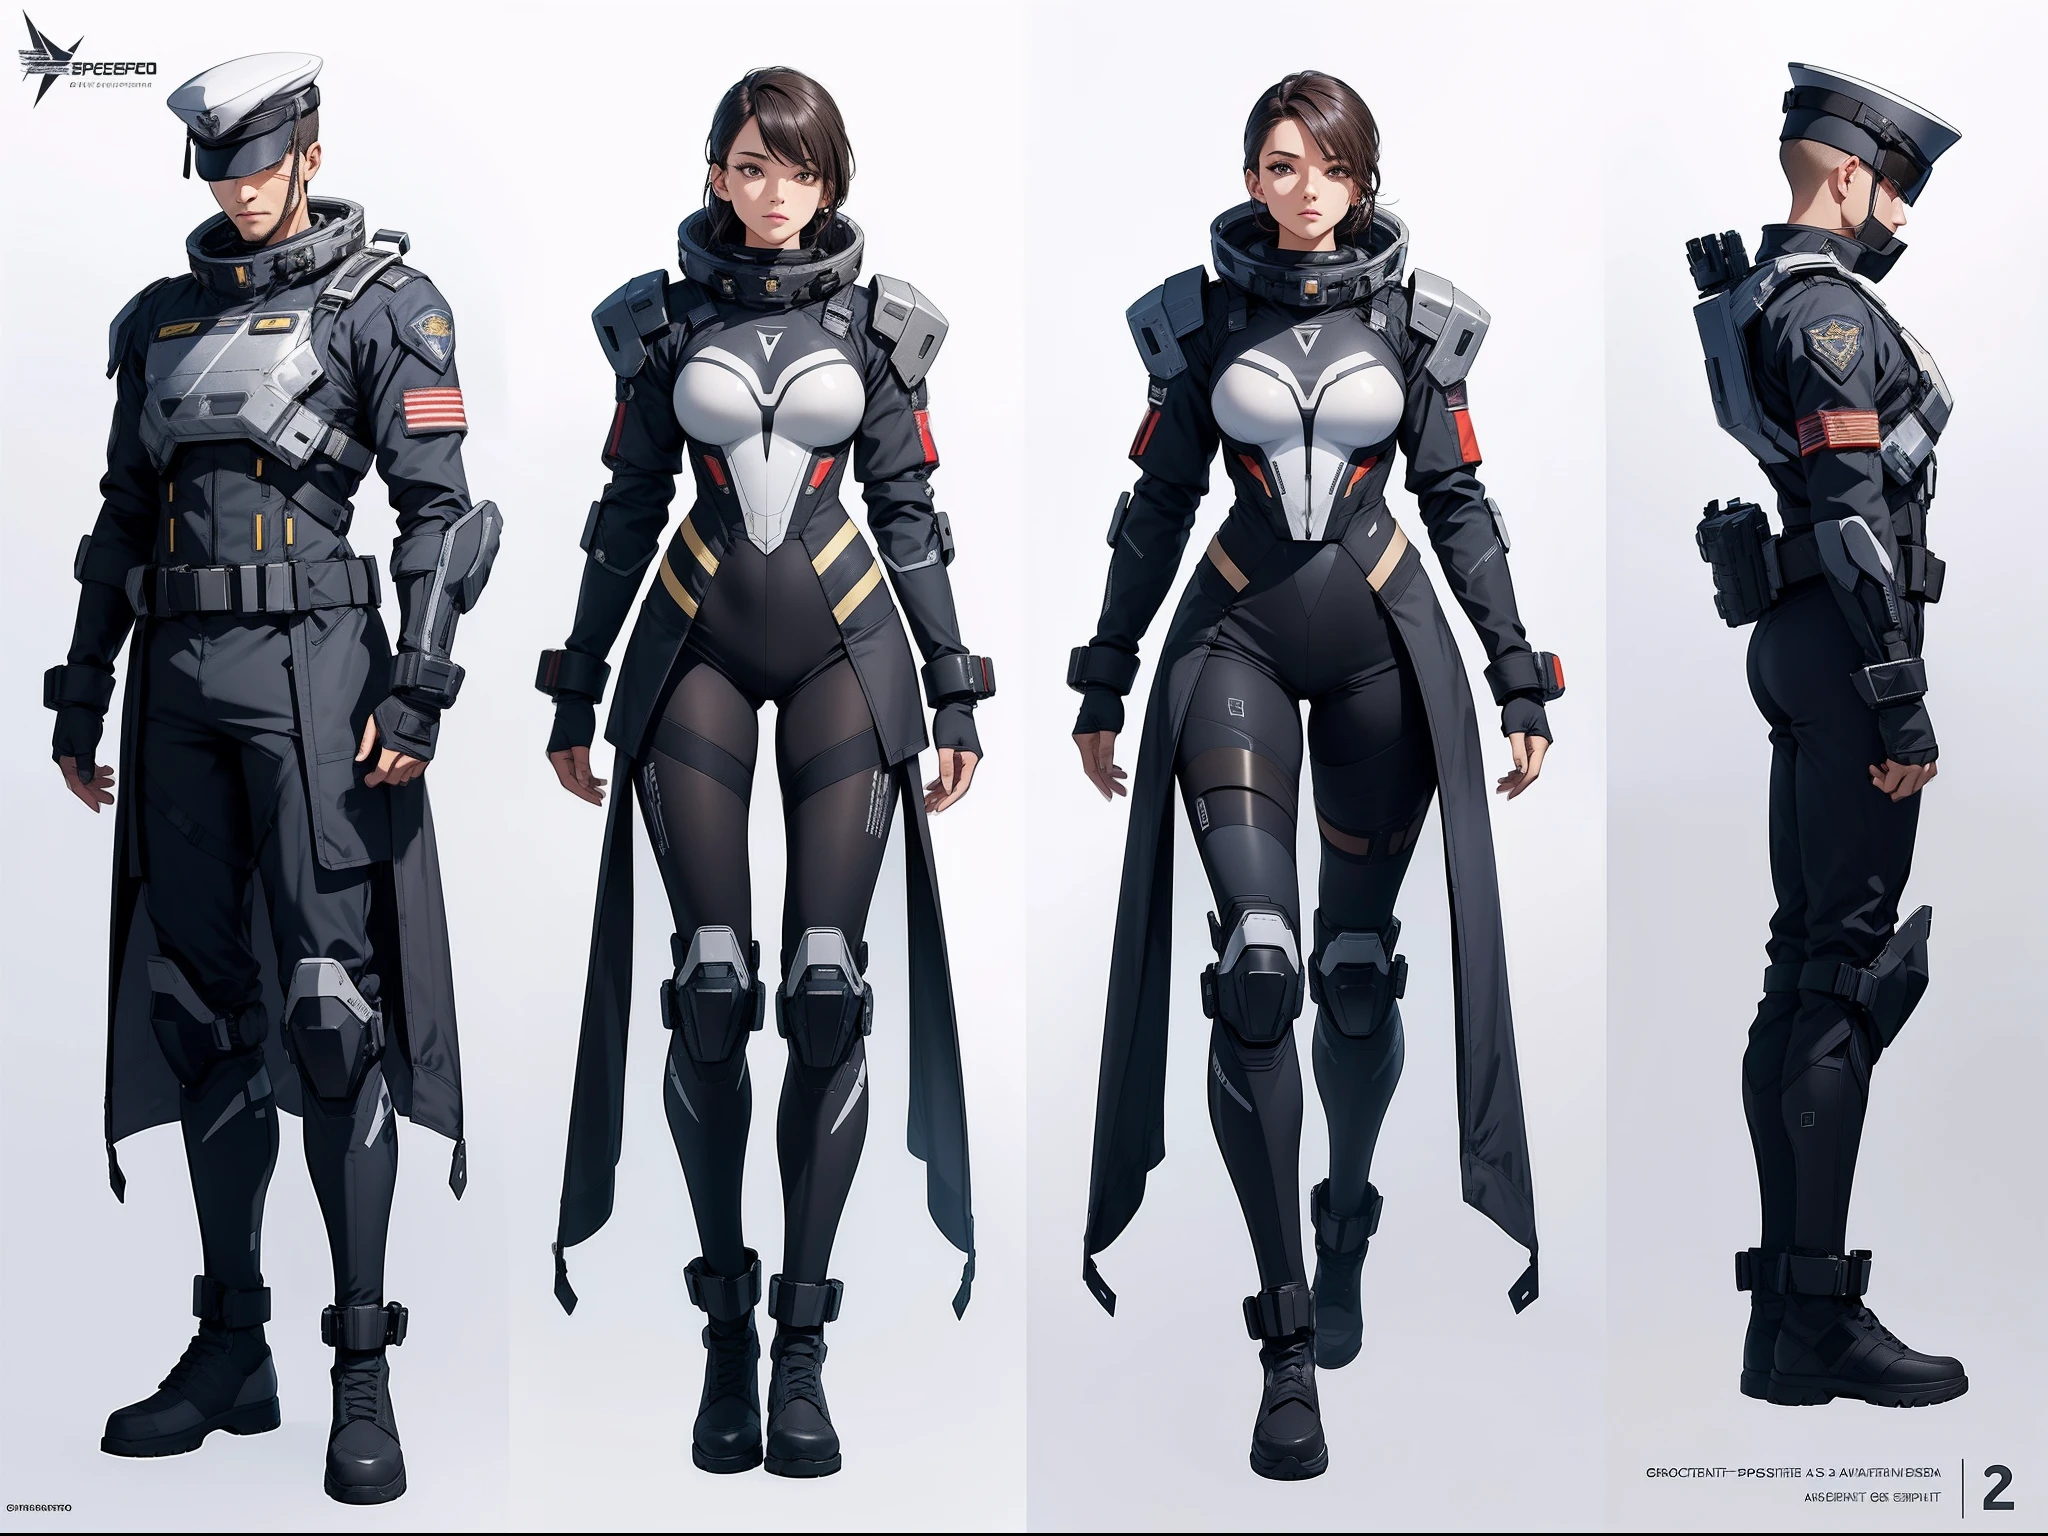 A comprehensive clothing sheet depicting a futuristic military spacesuit with high boots, mostrado em frontal, lado, and three-bedroom views against a white background. The sheet includes various angles of the clothing, Como fachada, traseira, e perspectivas laterais, together with a model sheet and a reference sheet, all with a full-body representation.